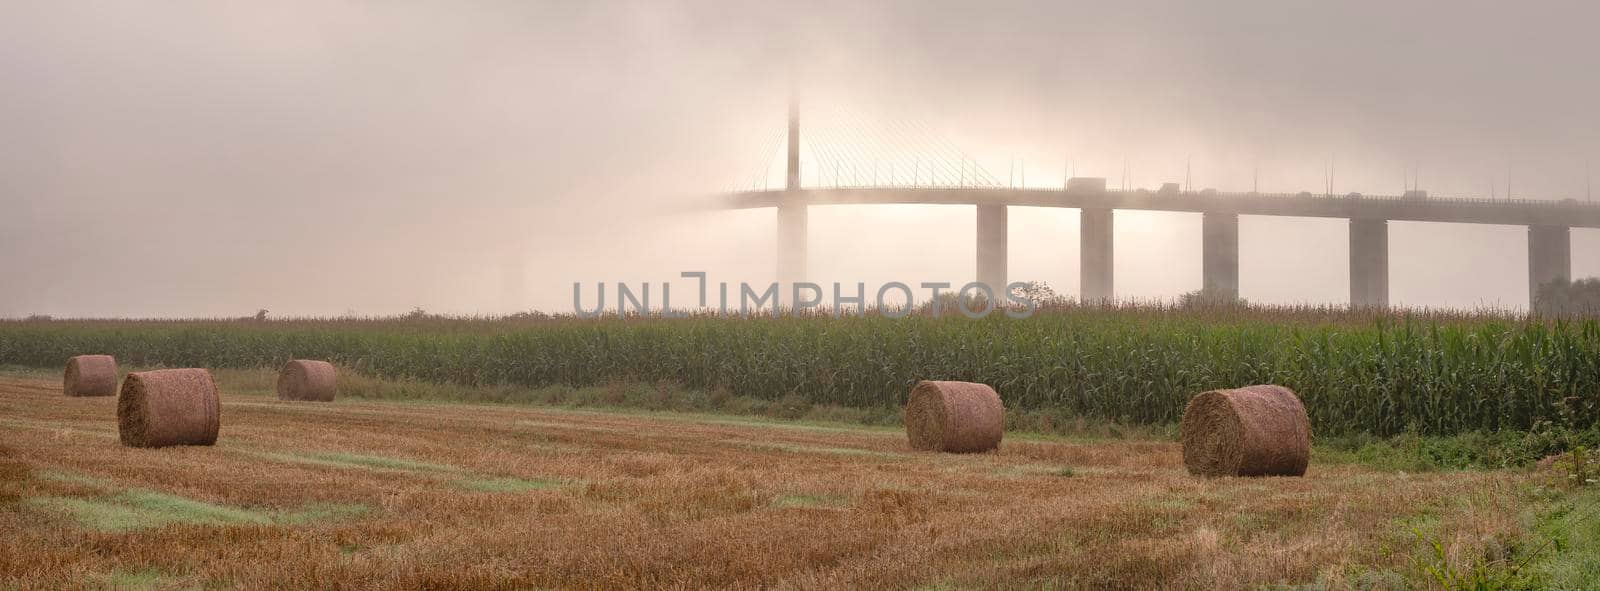 meadow landscape and pont de brotonne over river seine in french normandy during misty sunrise